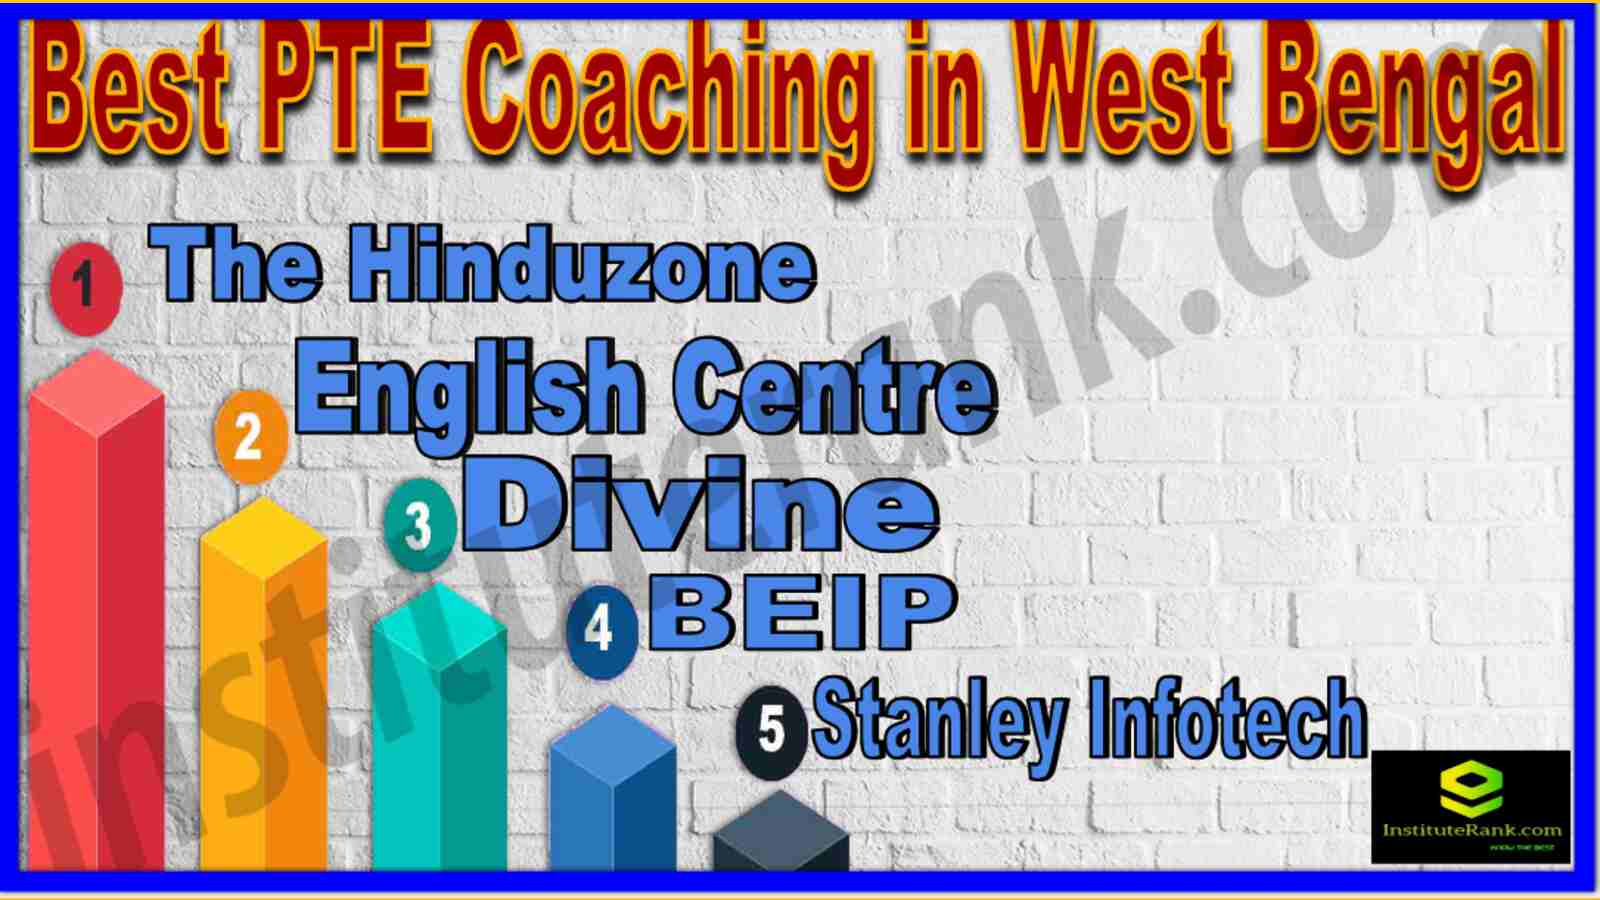 Best PTE Coaching in West Bengal